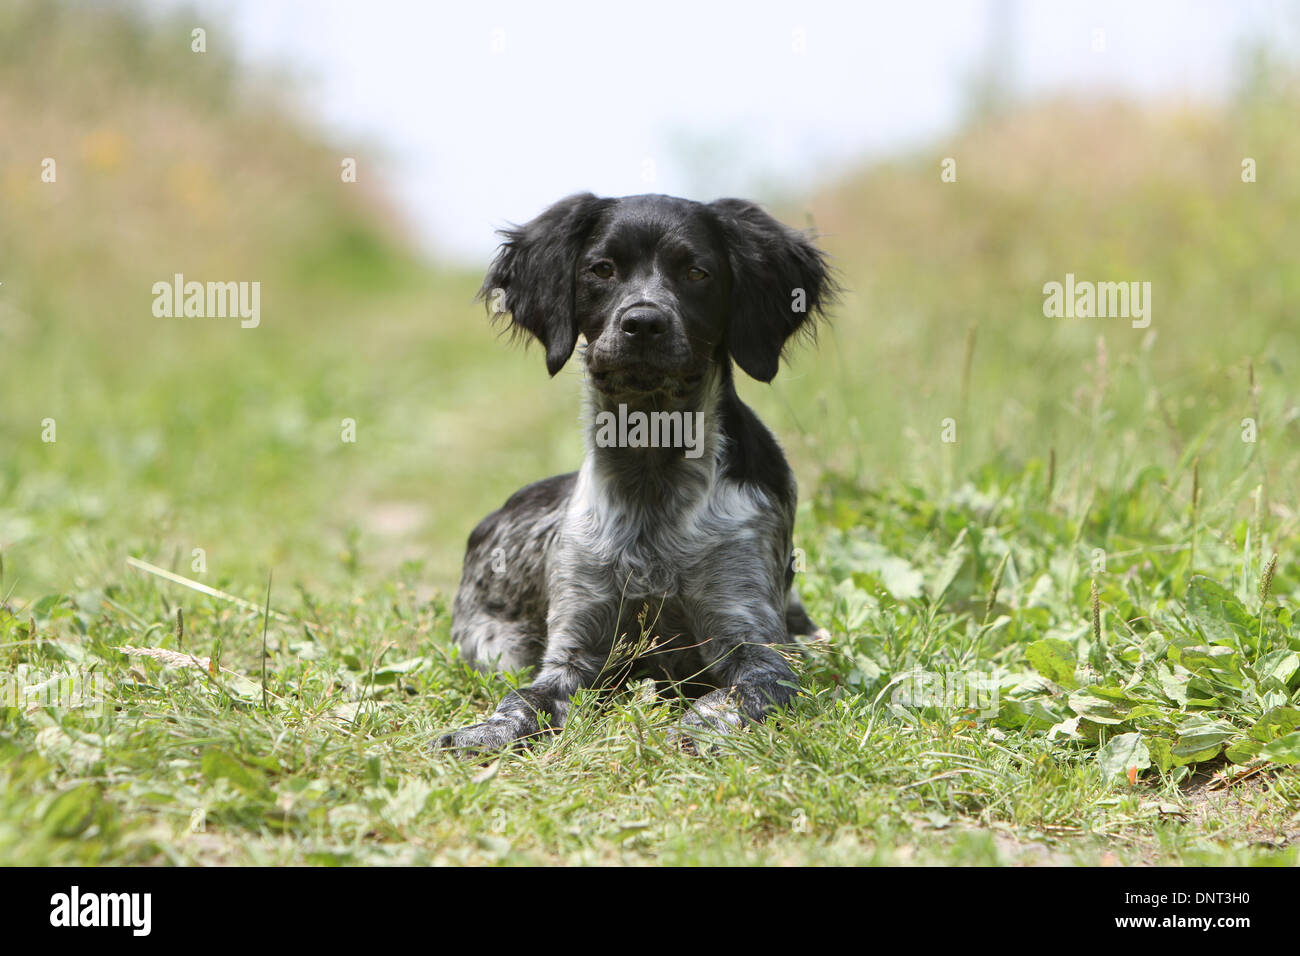 Dog Brittany Spaniel Epagneul Black High Resolution Stock Photography And Images Alamy